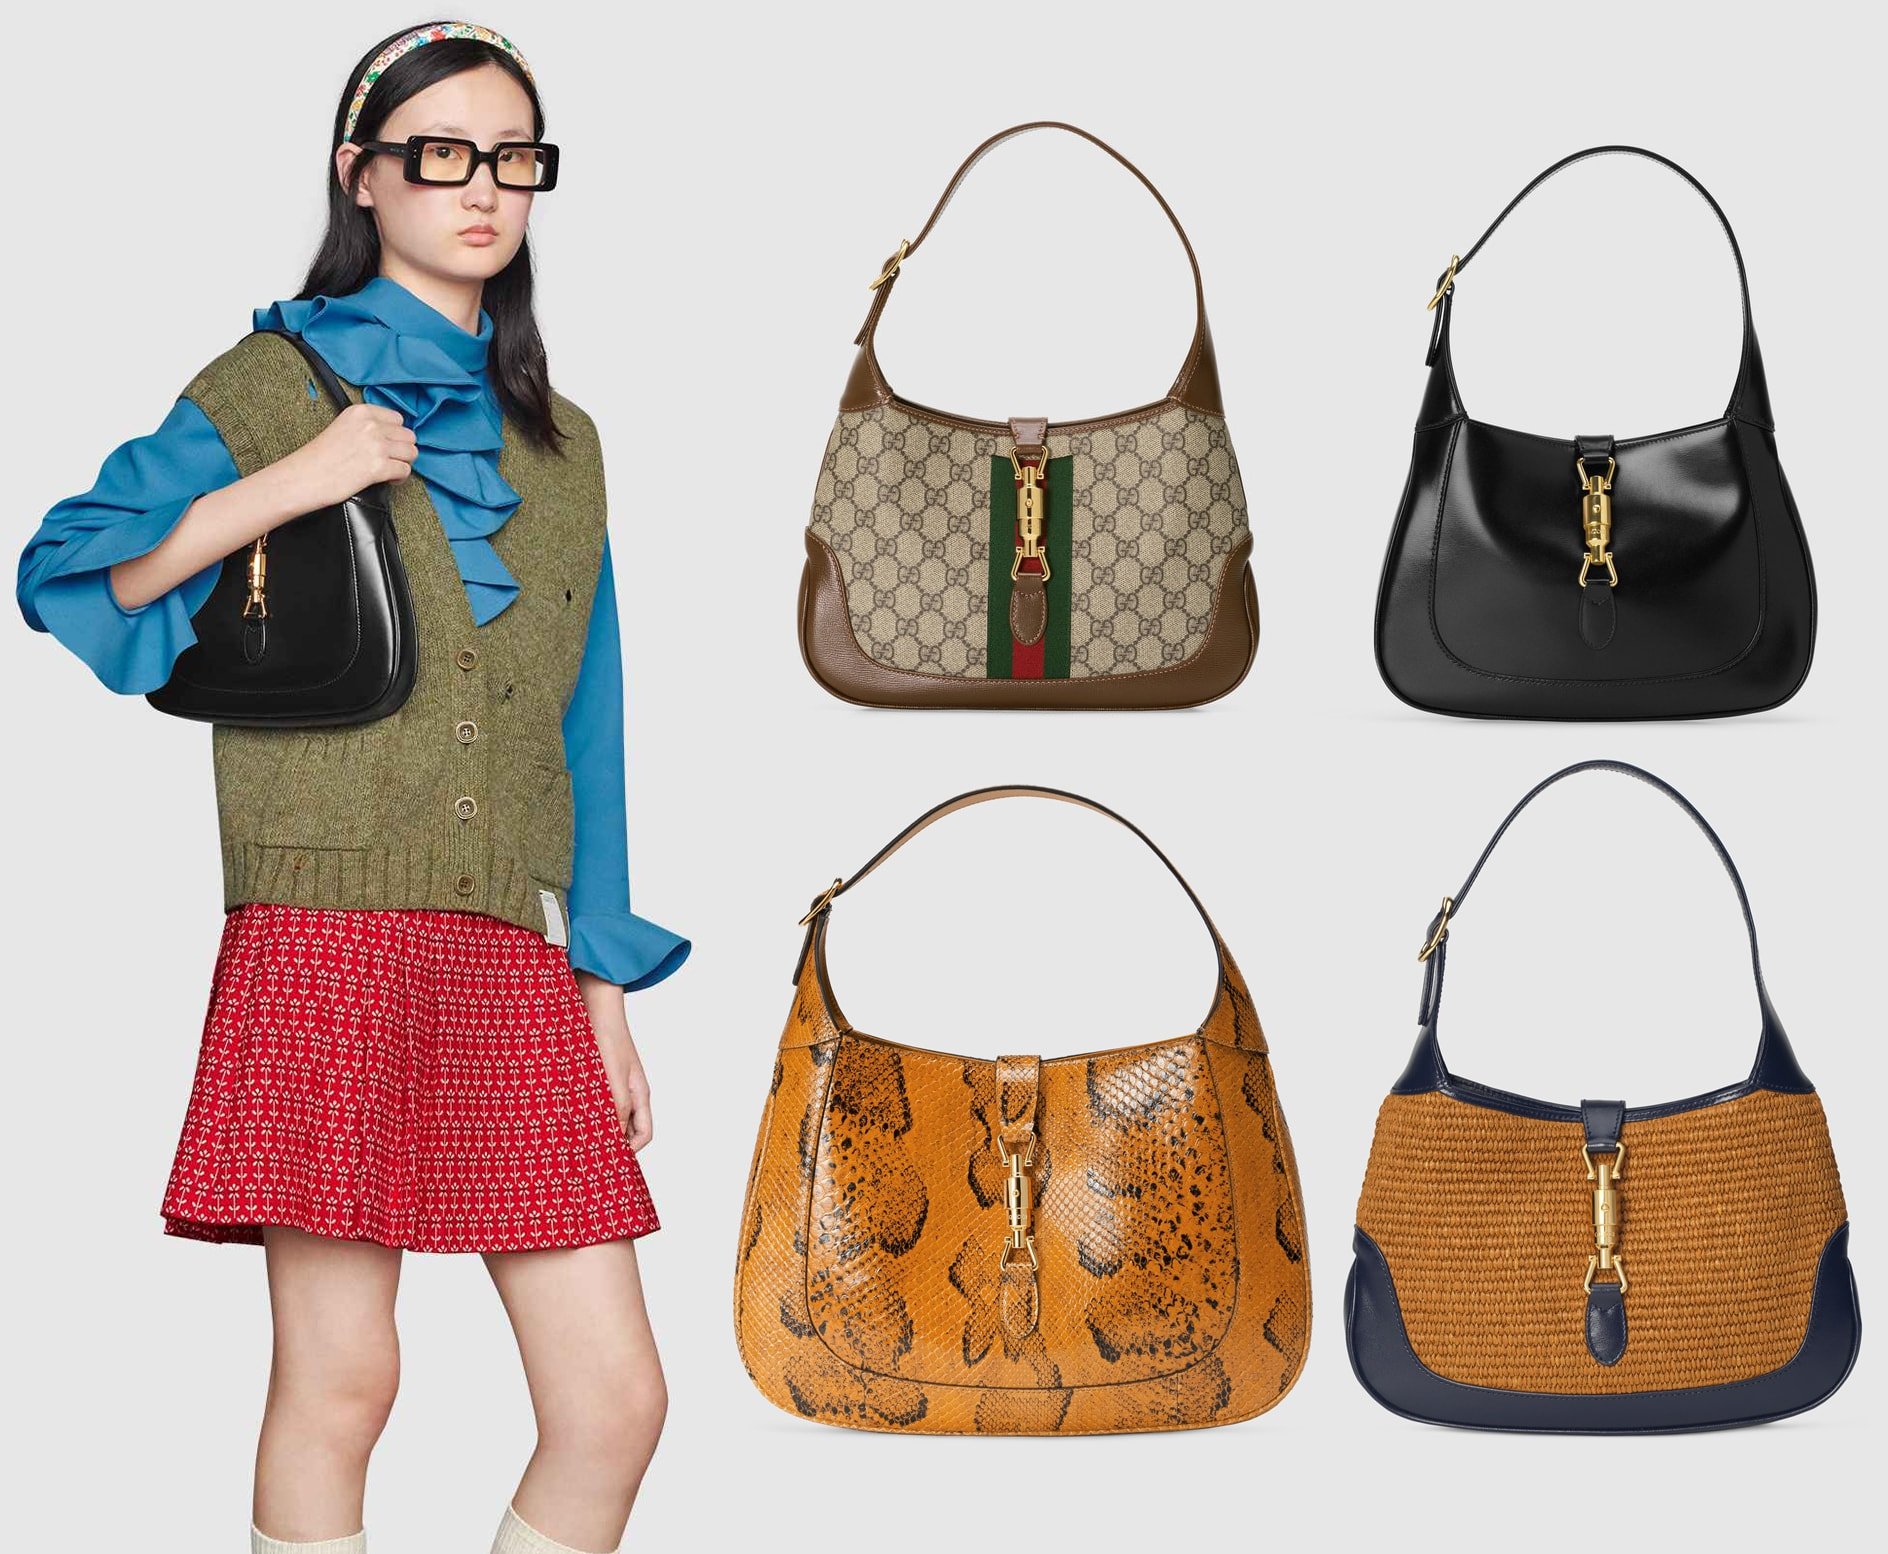 Named after Jackie Kennedy Onassis, Gucci's Jackie hobo bag is an archival style that has been given a contemporary feel